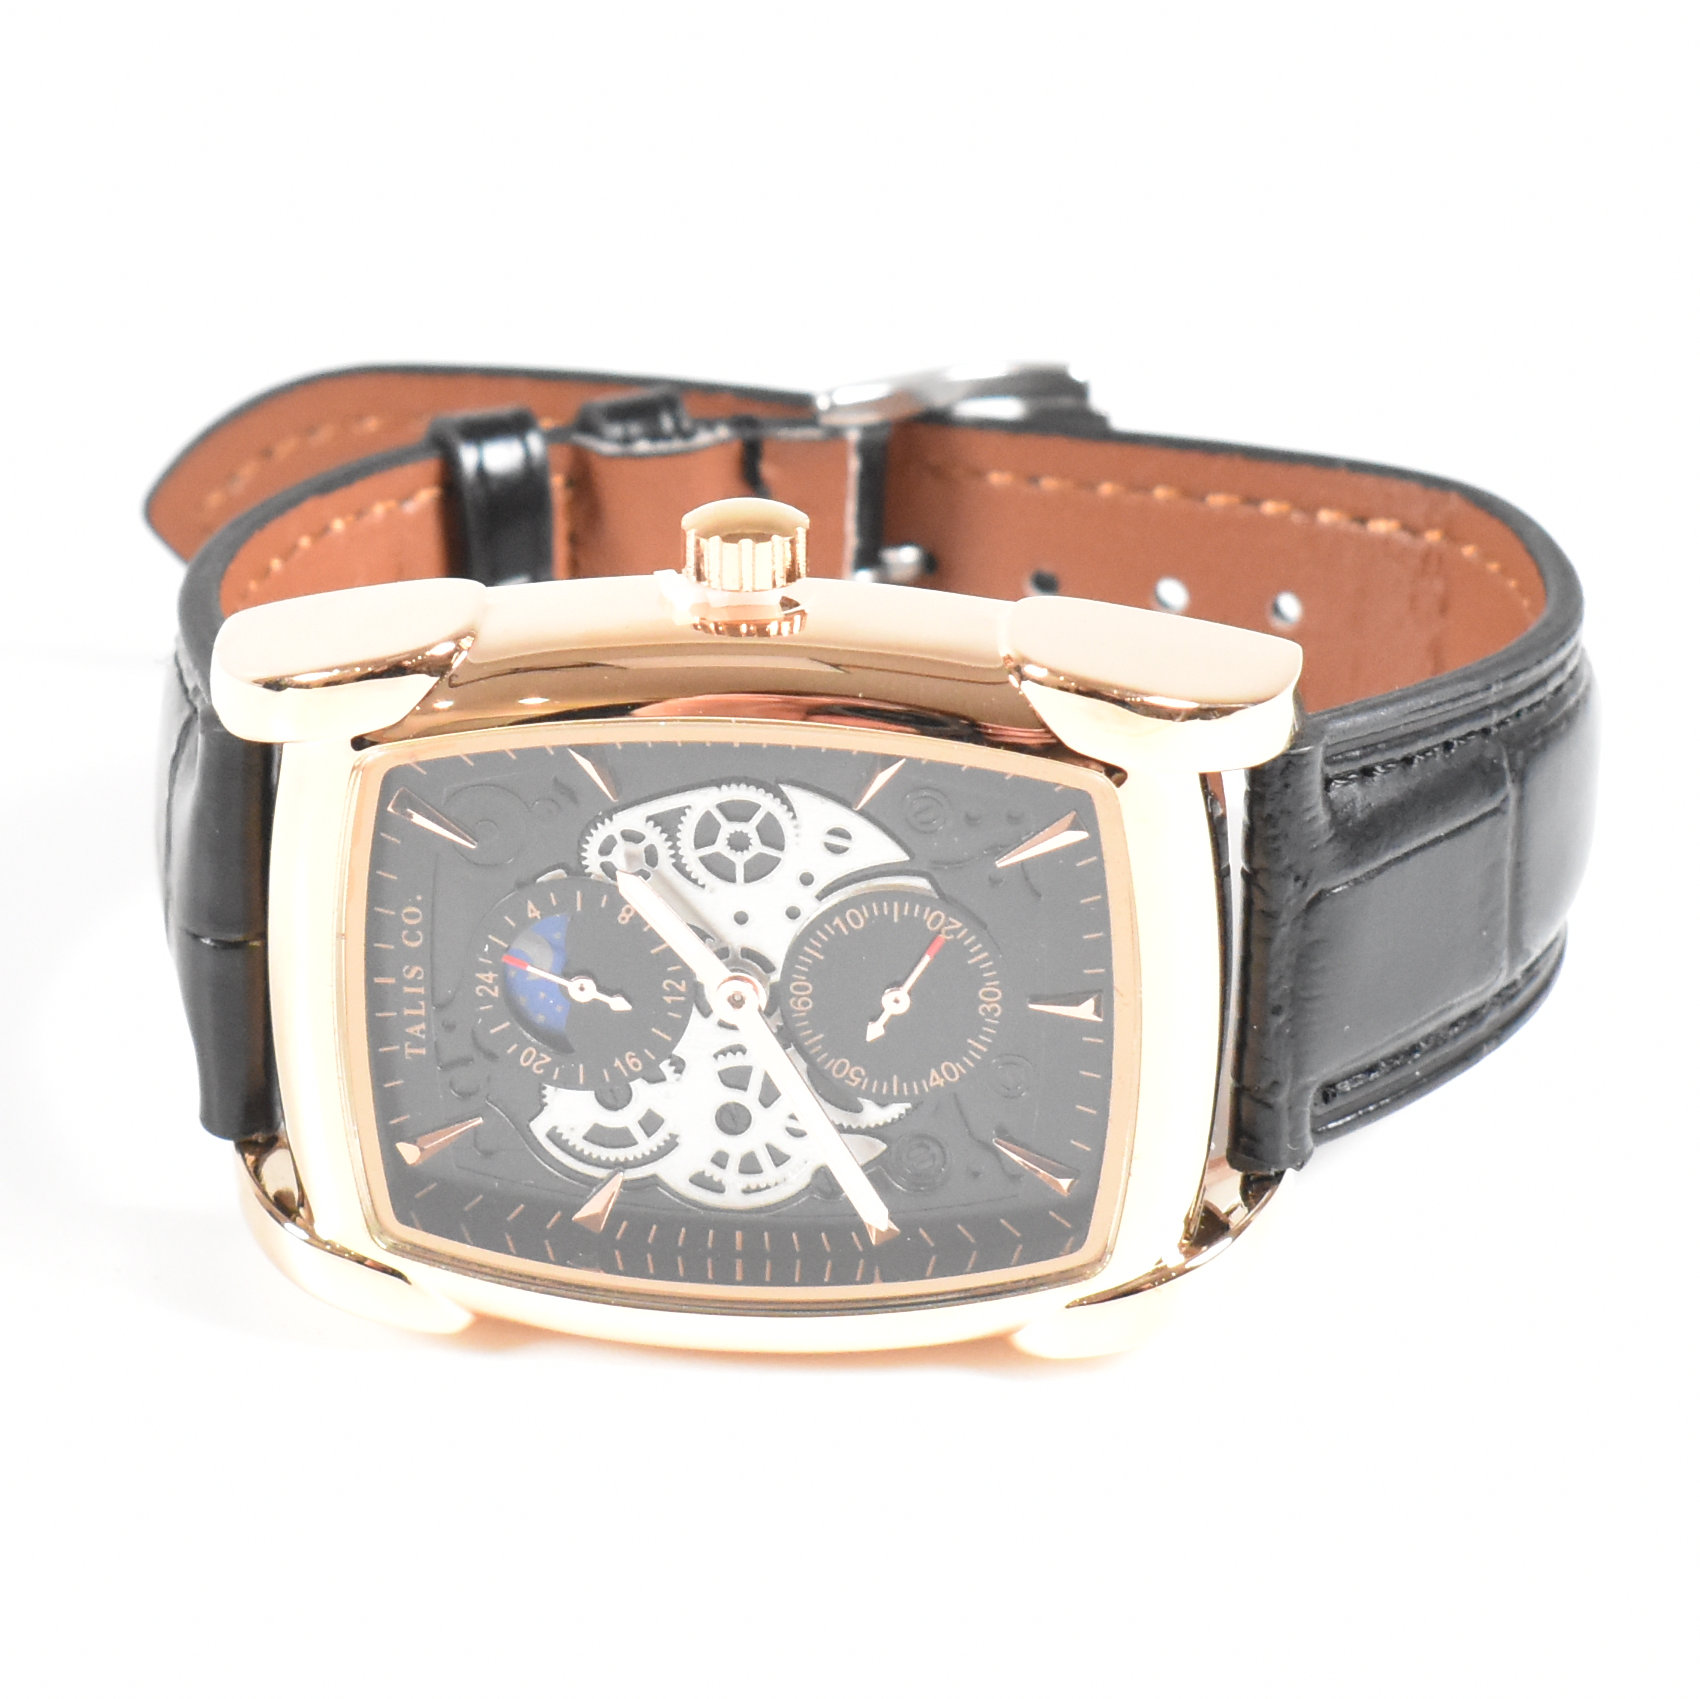 MENS TALIS CO WRIST WATCH - Image 4 of 5